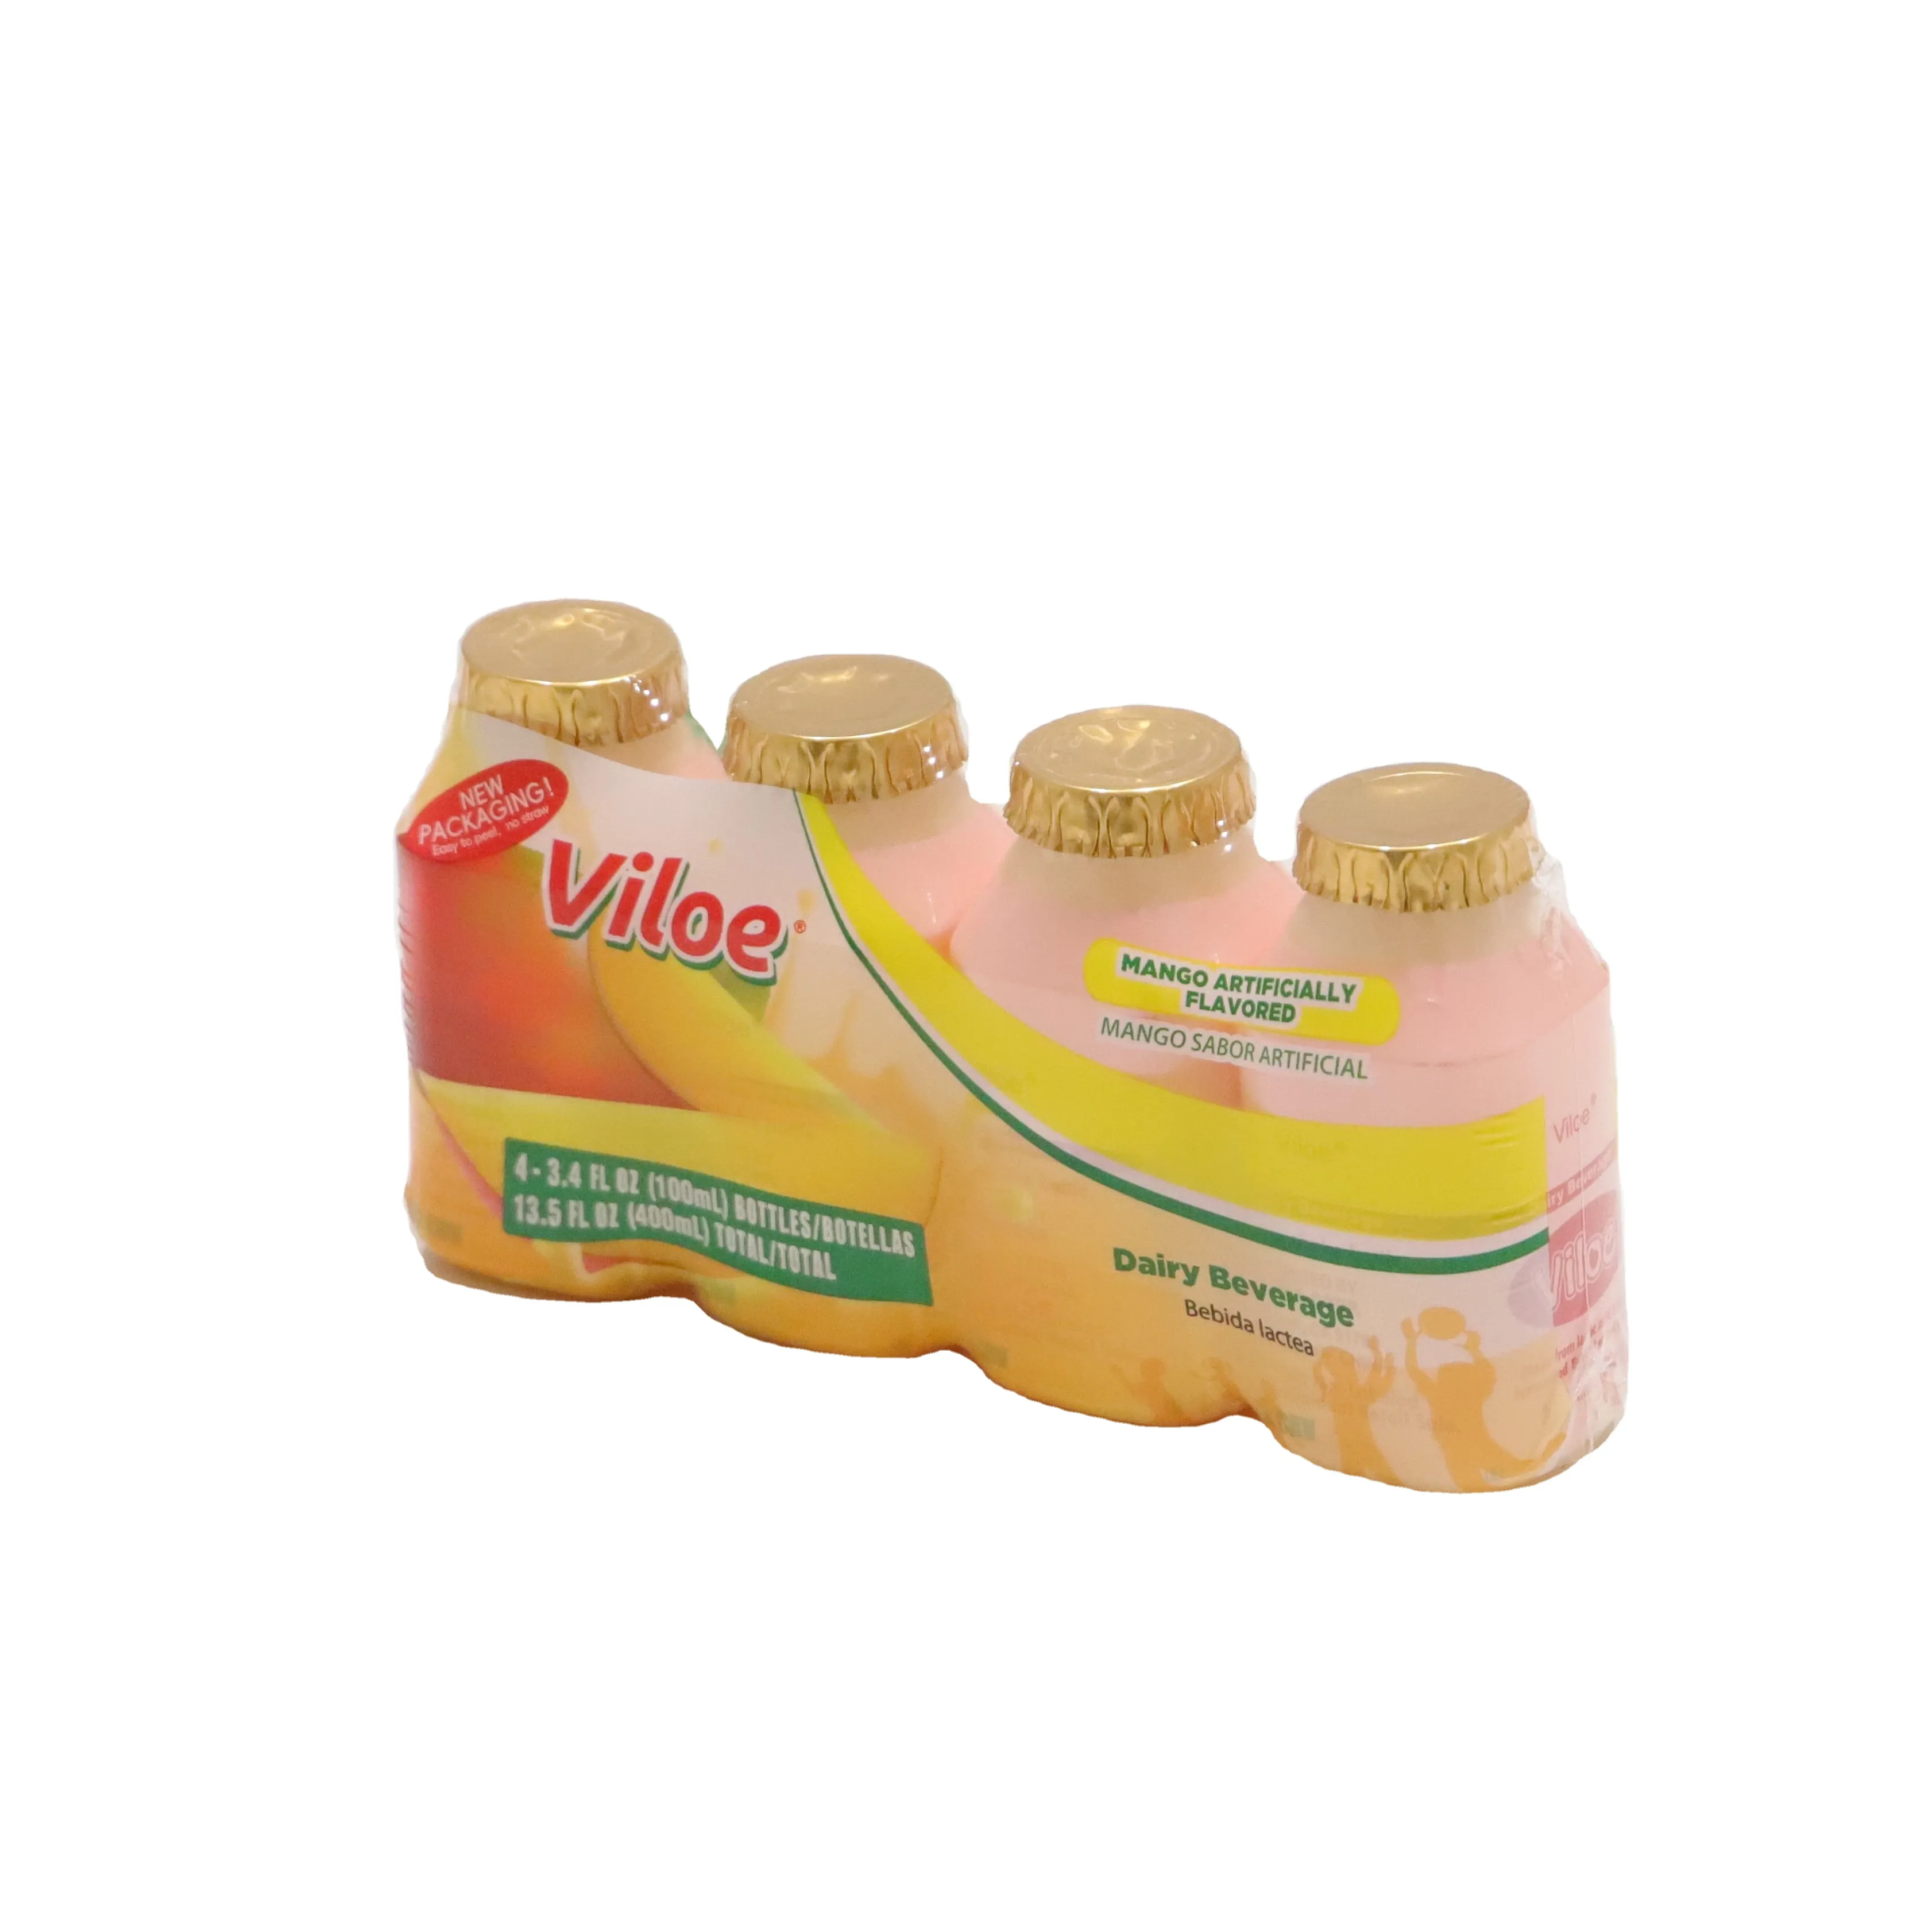 Viloe Soft Drinks about Mango Flavored Saturated Fat Free and Trans Fat Free